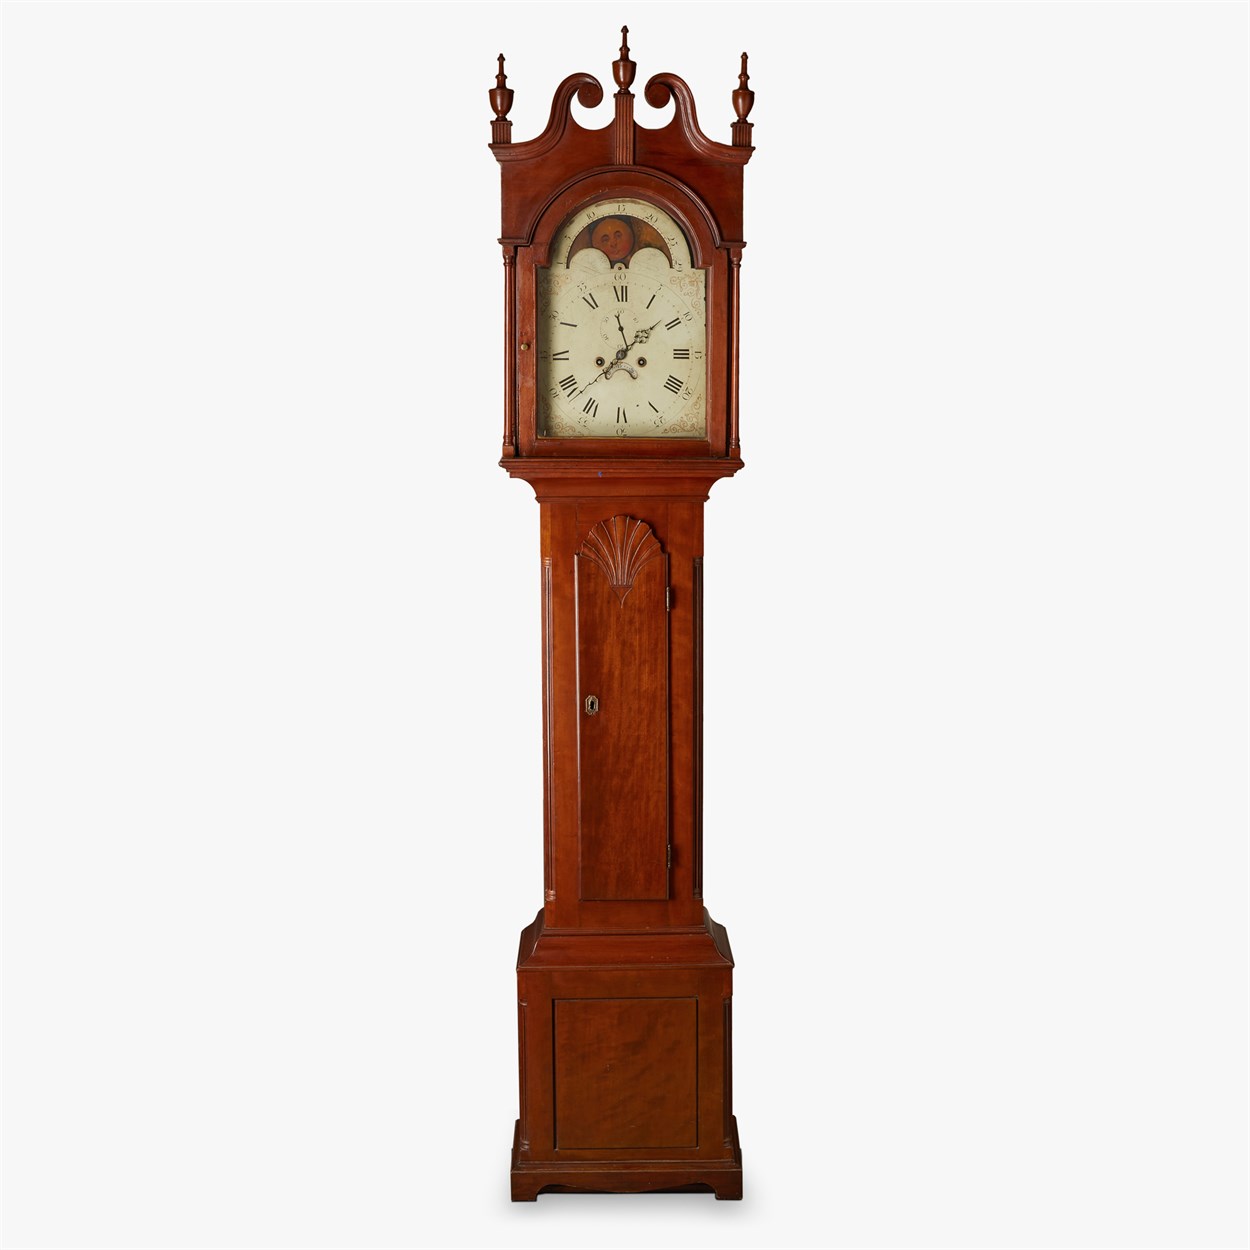 Lot 81 - Federal-style cherrywood tall case clock